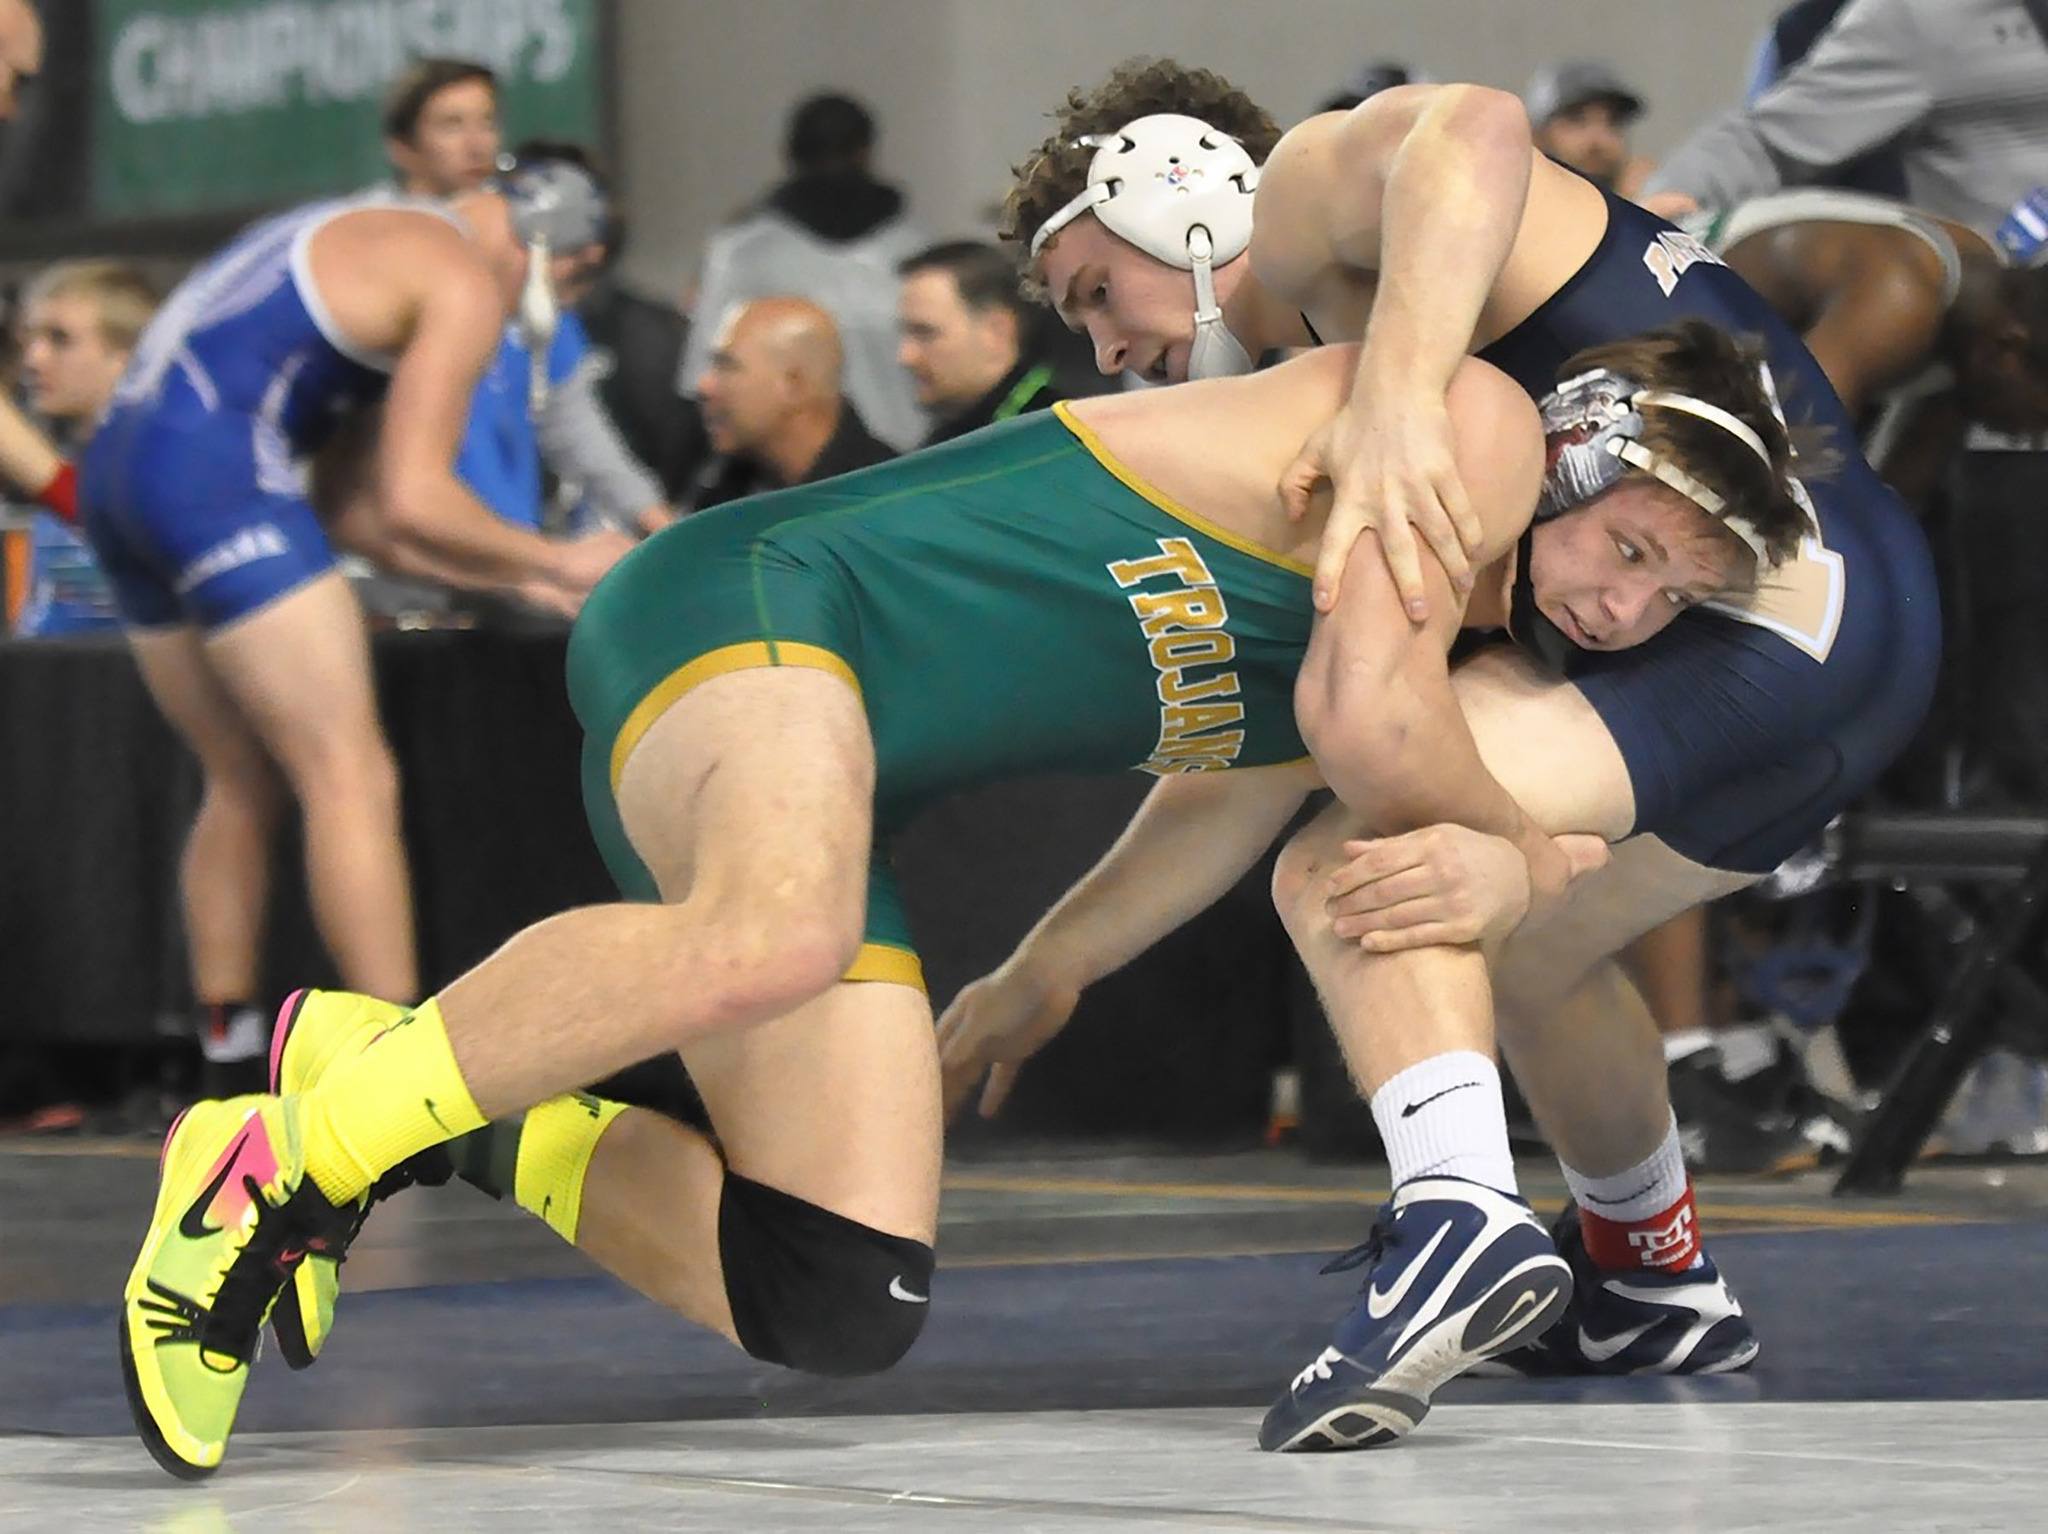 Auburn’s Cole Washburn, bottom, tangles with Mead’s Trevor Senn, the eventual state champion, in the 182-pound semifinals at Mat Classic XXIX at the Tacoma Dome on Saturday. Senn scored an 8-7 decision. Washburn recovered to finish third. RACHEL CIAMPI, Auburn Reporter